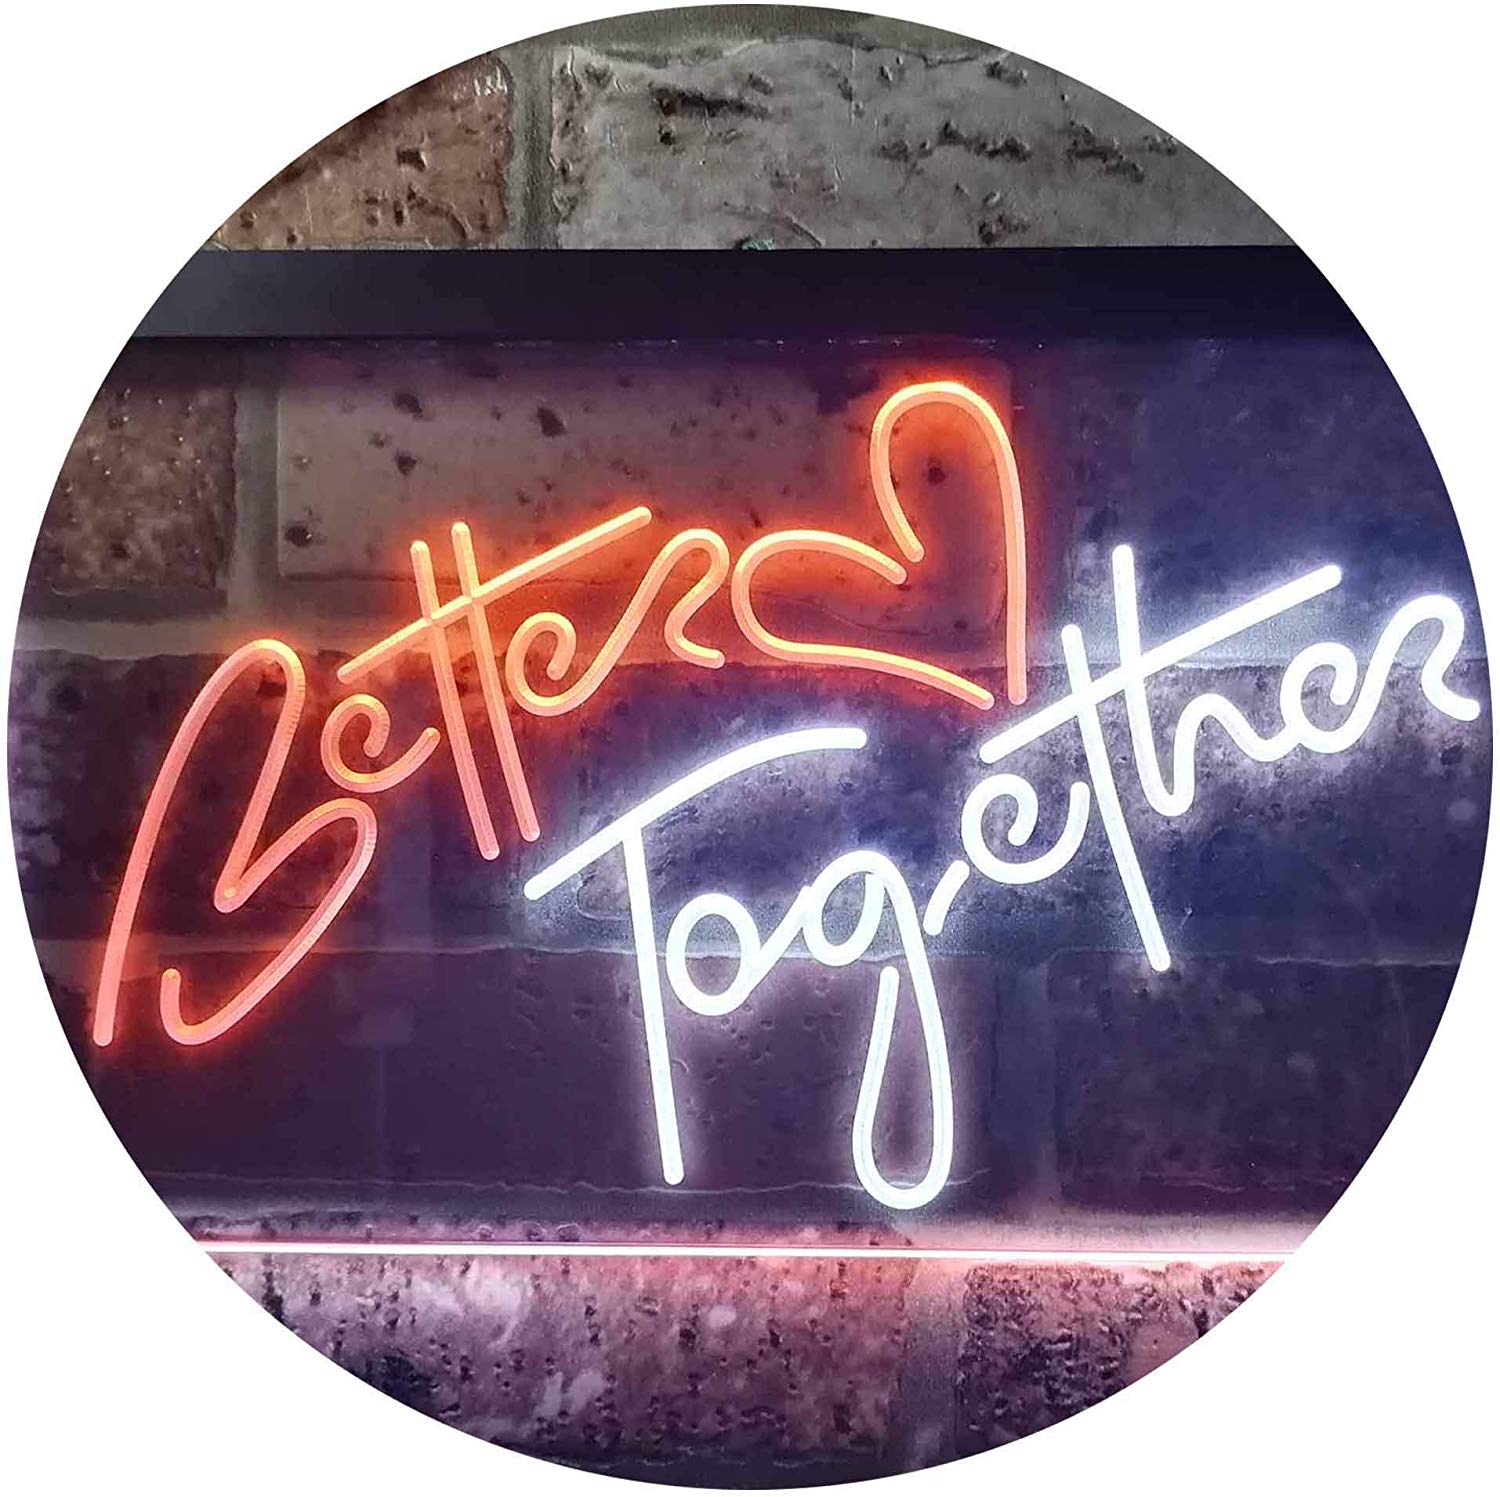 Love Heart Better Together LED Neon Light Sign - Way Up Gifts